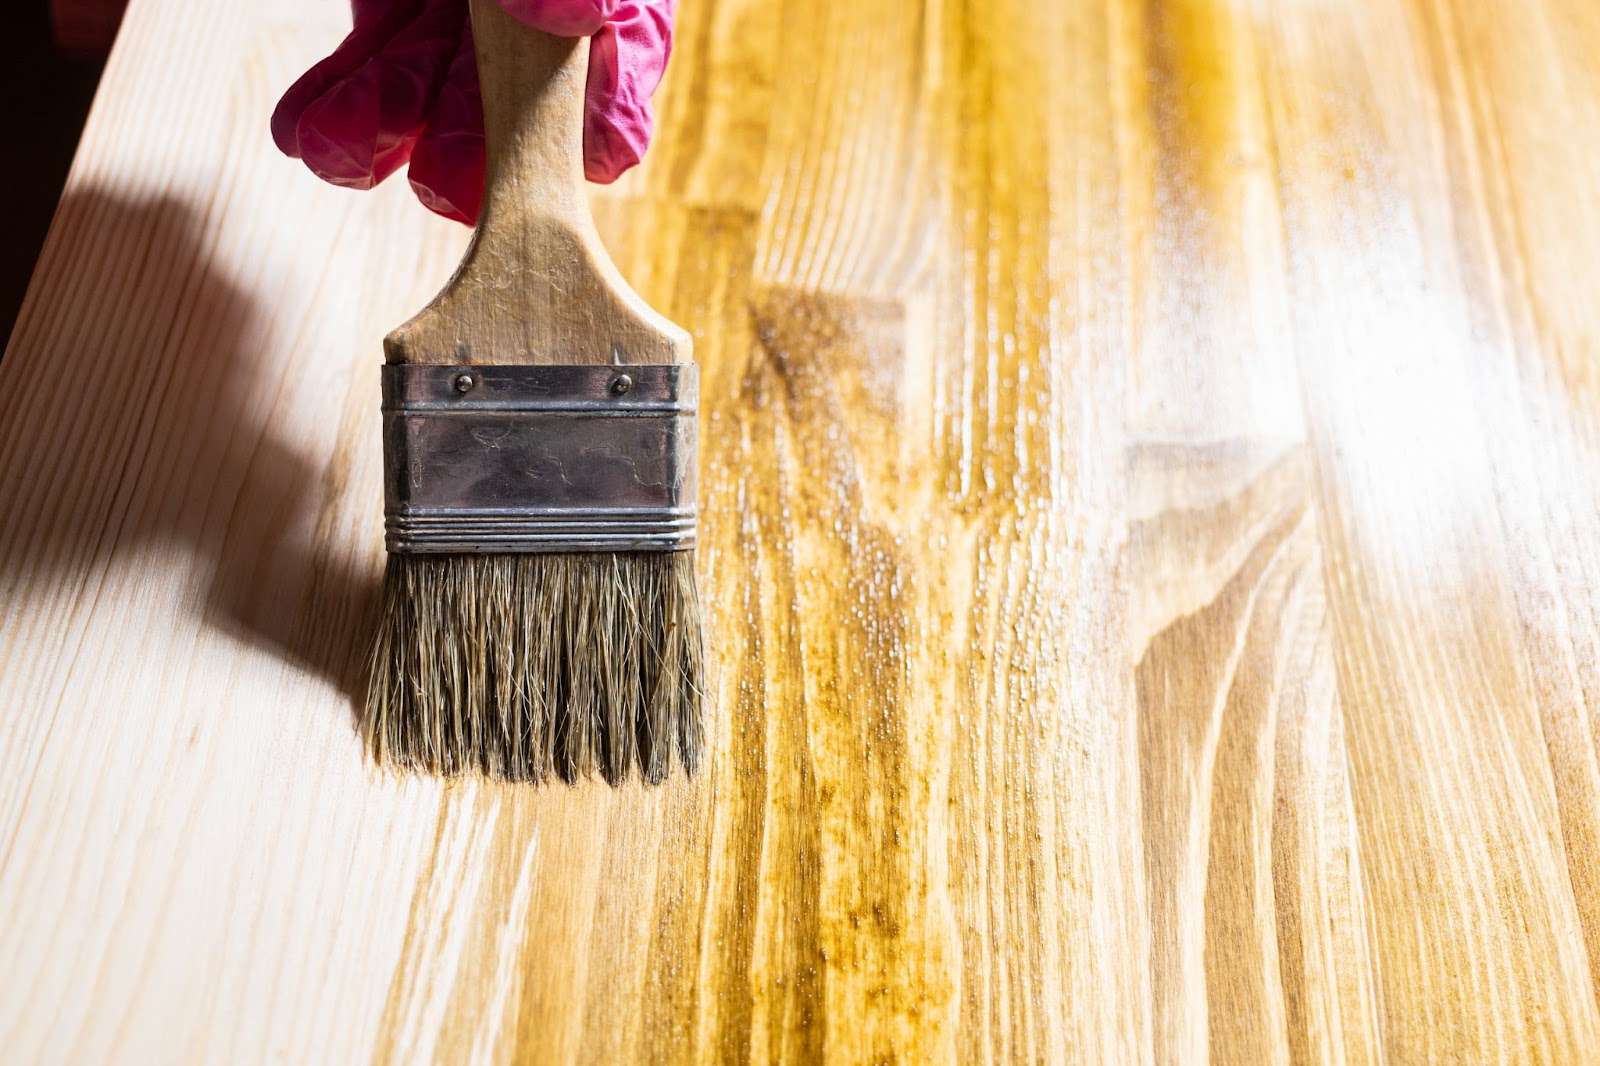 A worker uses a paintbrush to paint the wooden board with wooden stain. 